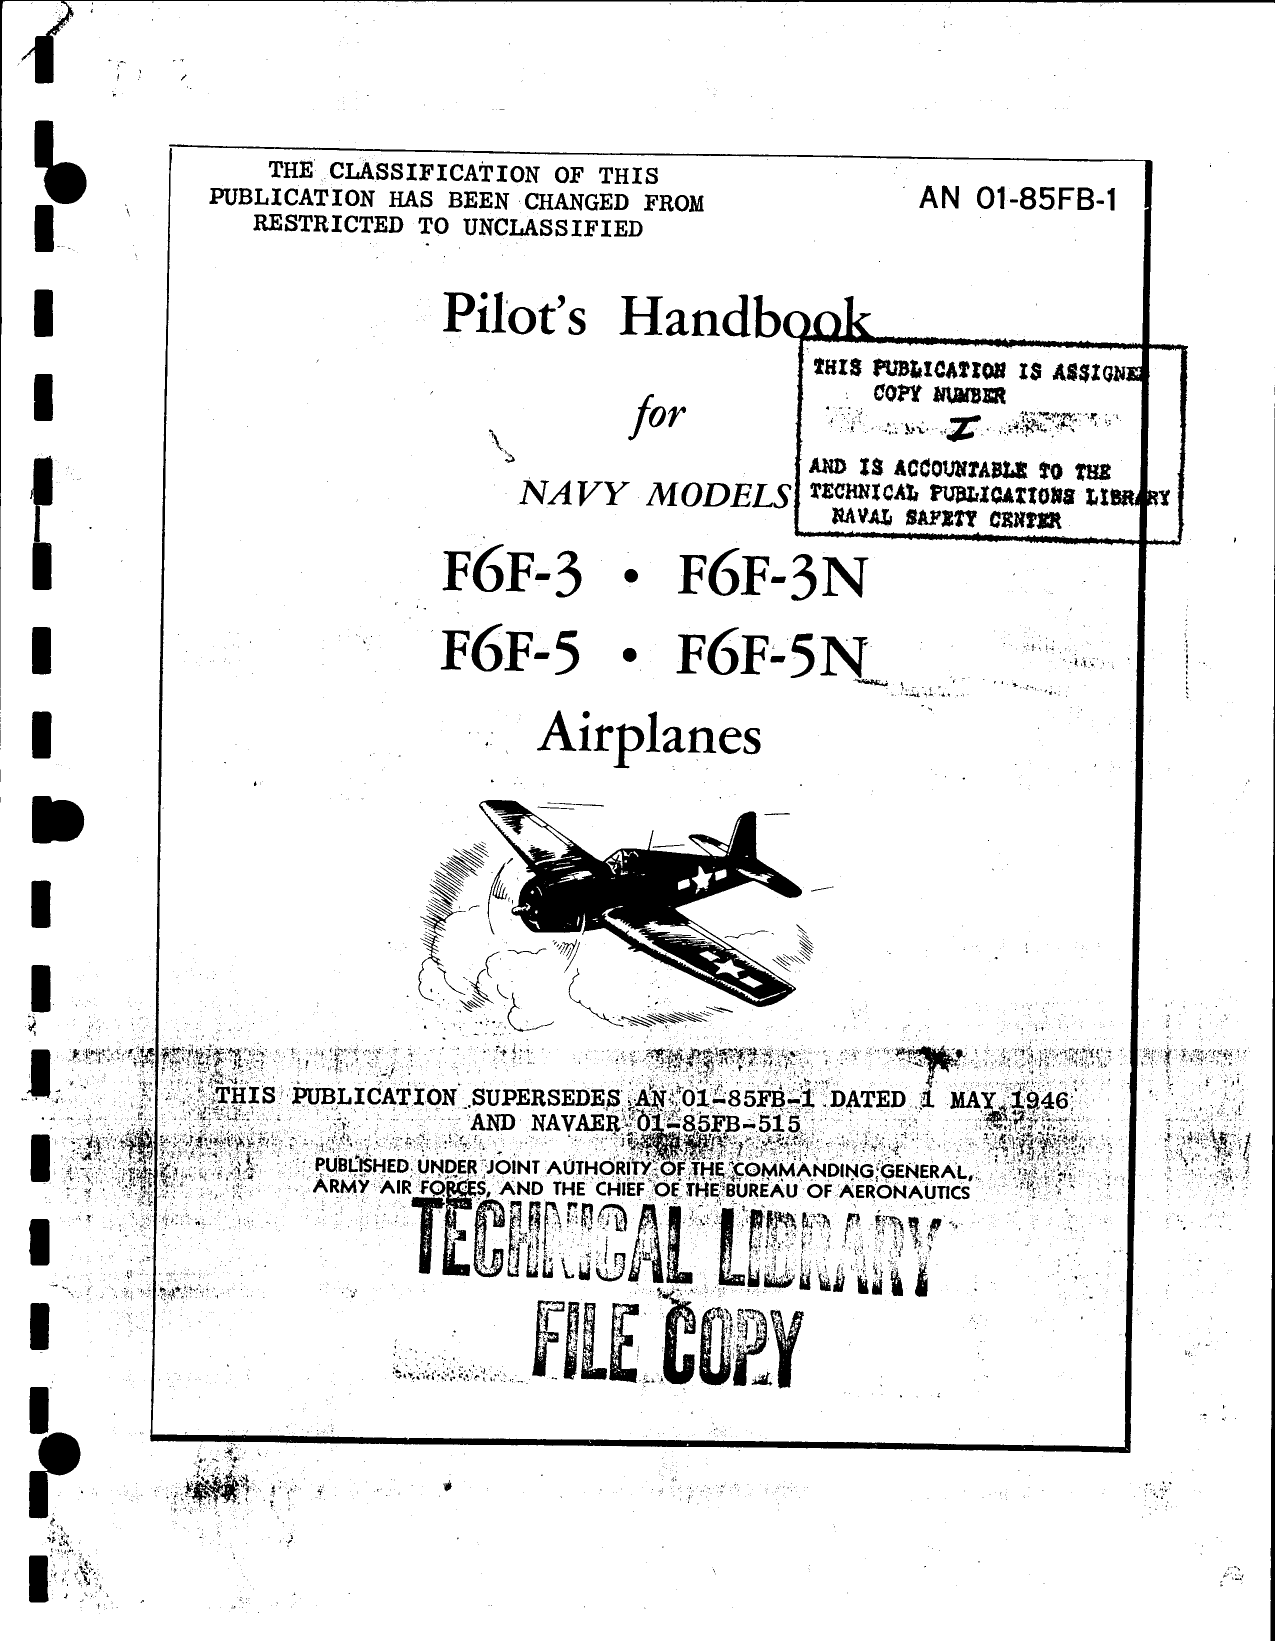 Sample page 1 from AirCorps Library document: Pilot's Handbook for Navy Models F6F-3, F6F-3N, F6F-5 and F6F-5N